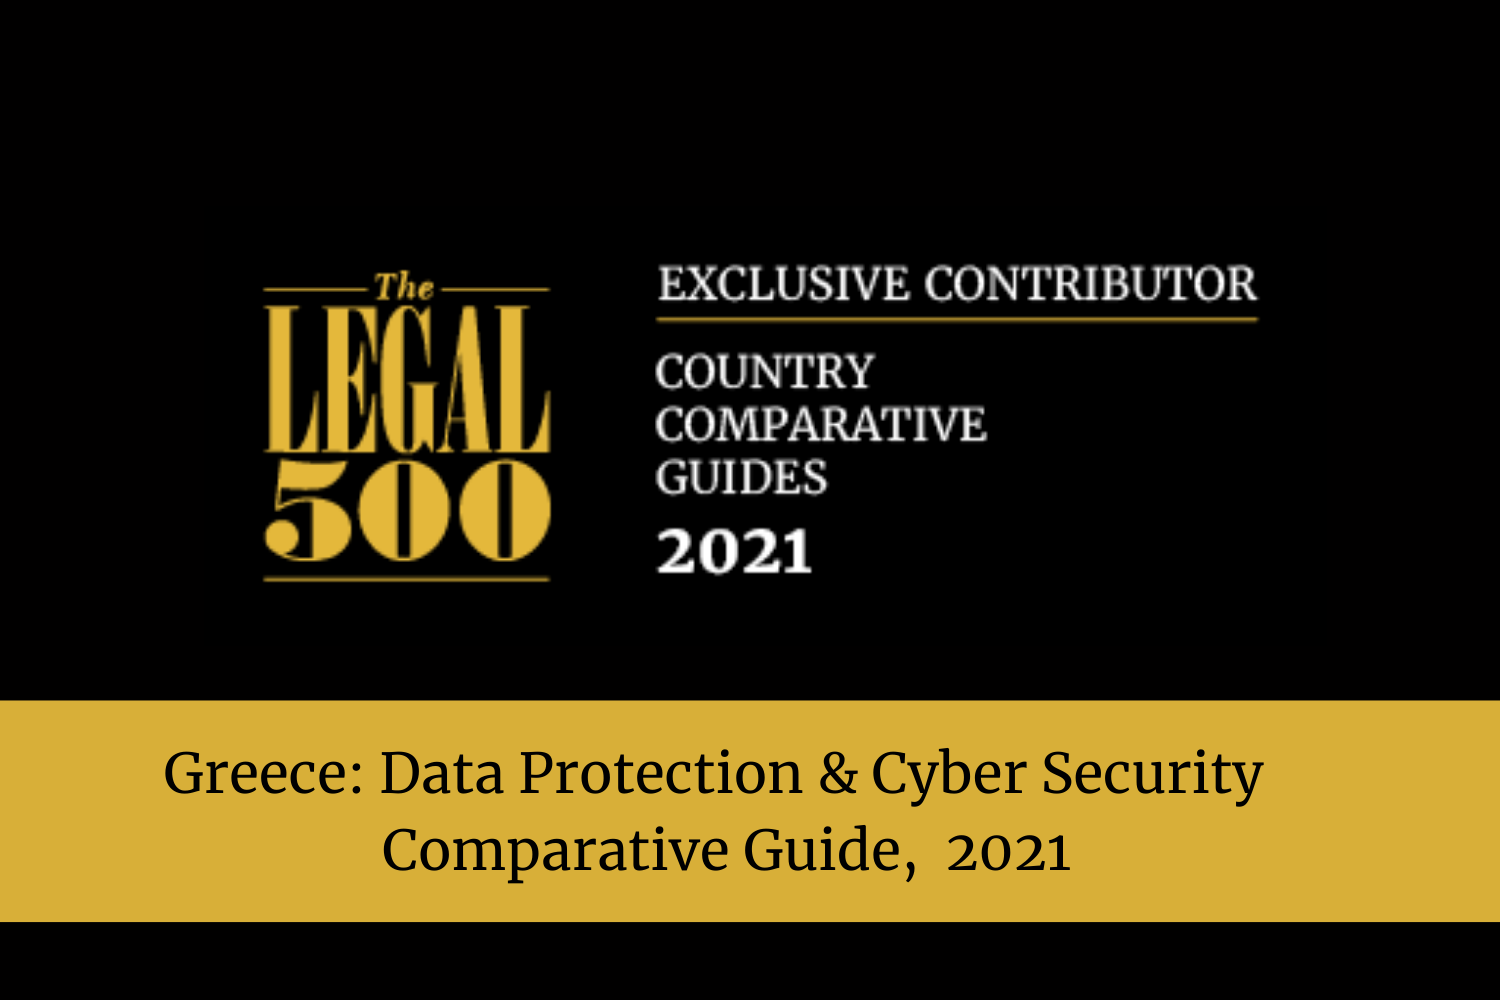 Andersen Legal: Exclusive contributor to The Legal 500 Data Protection and Cyber Security Comparative Guide